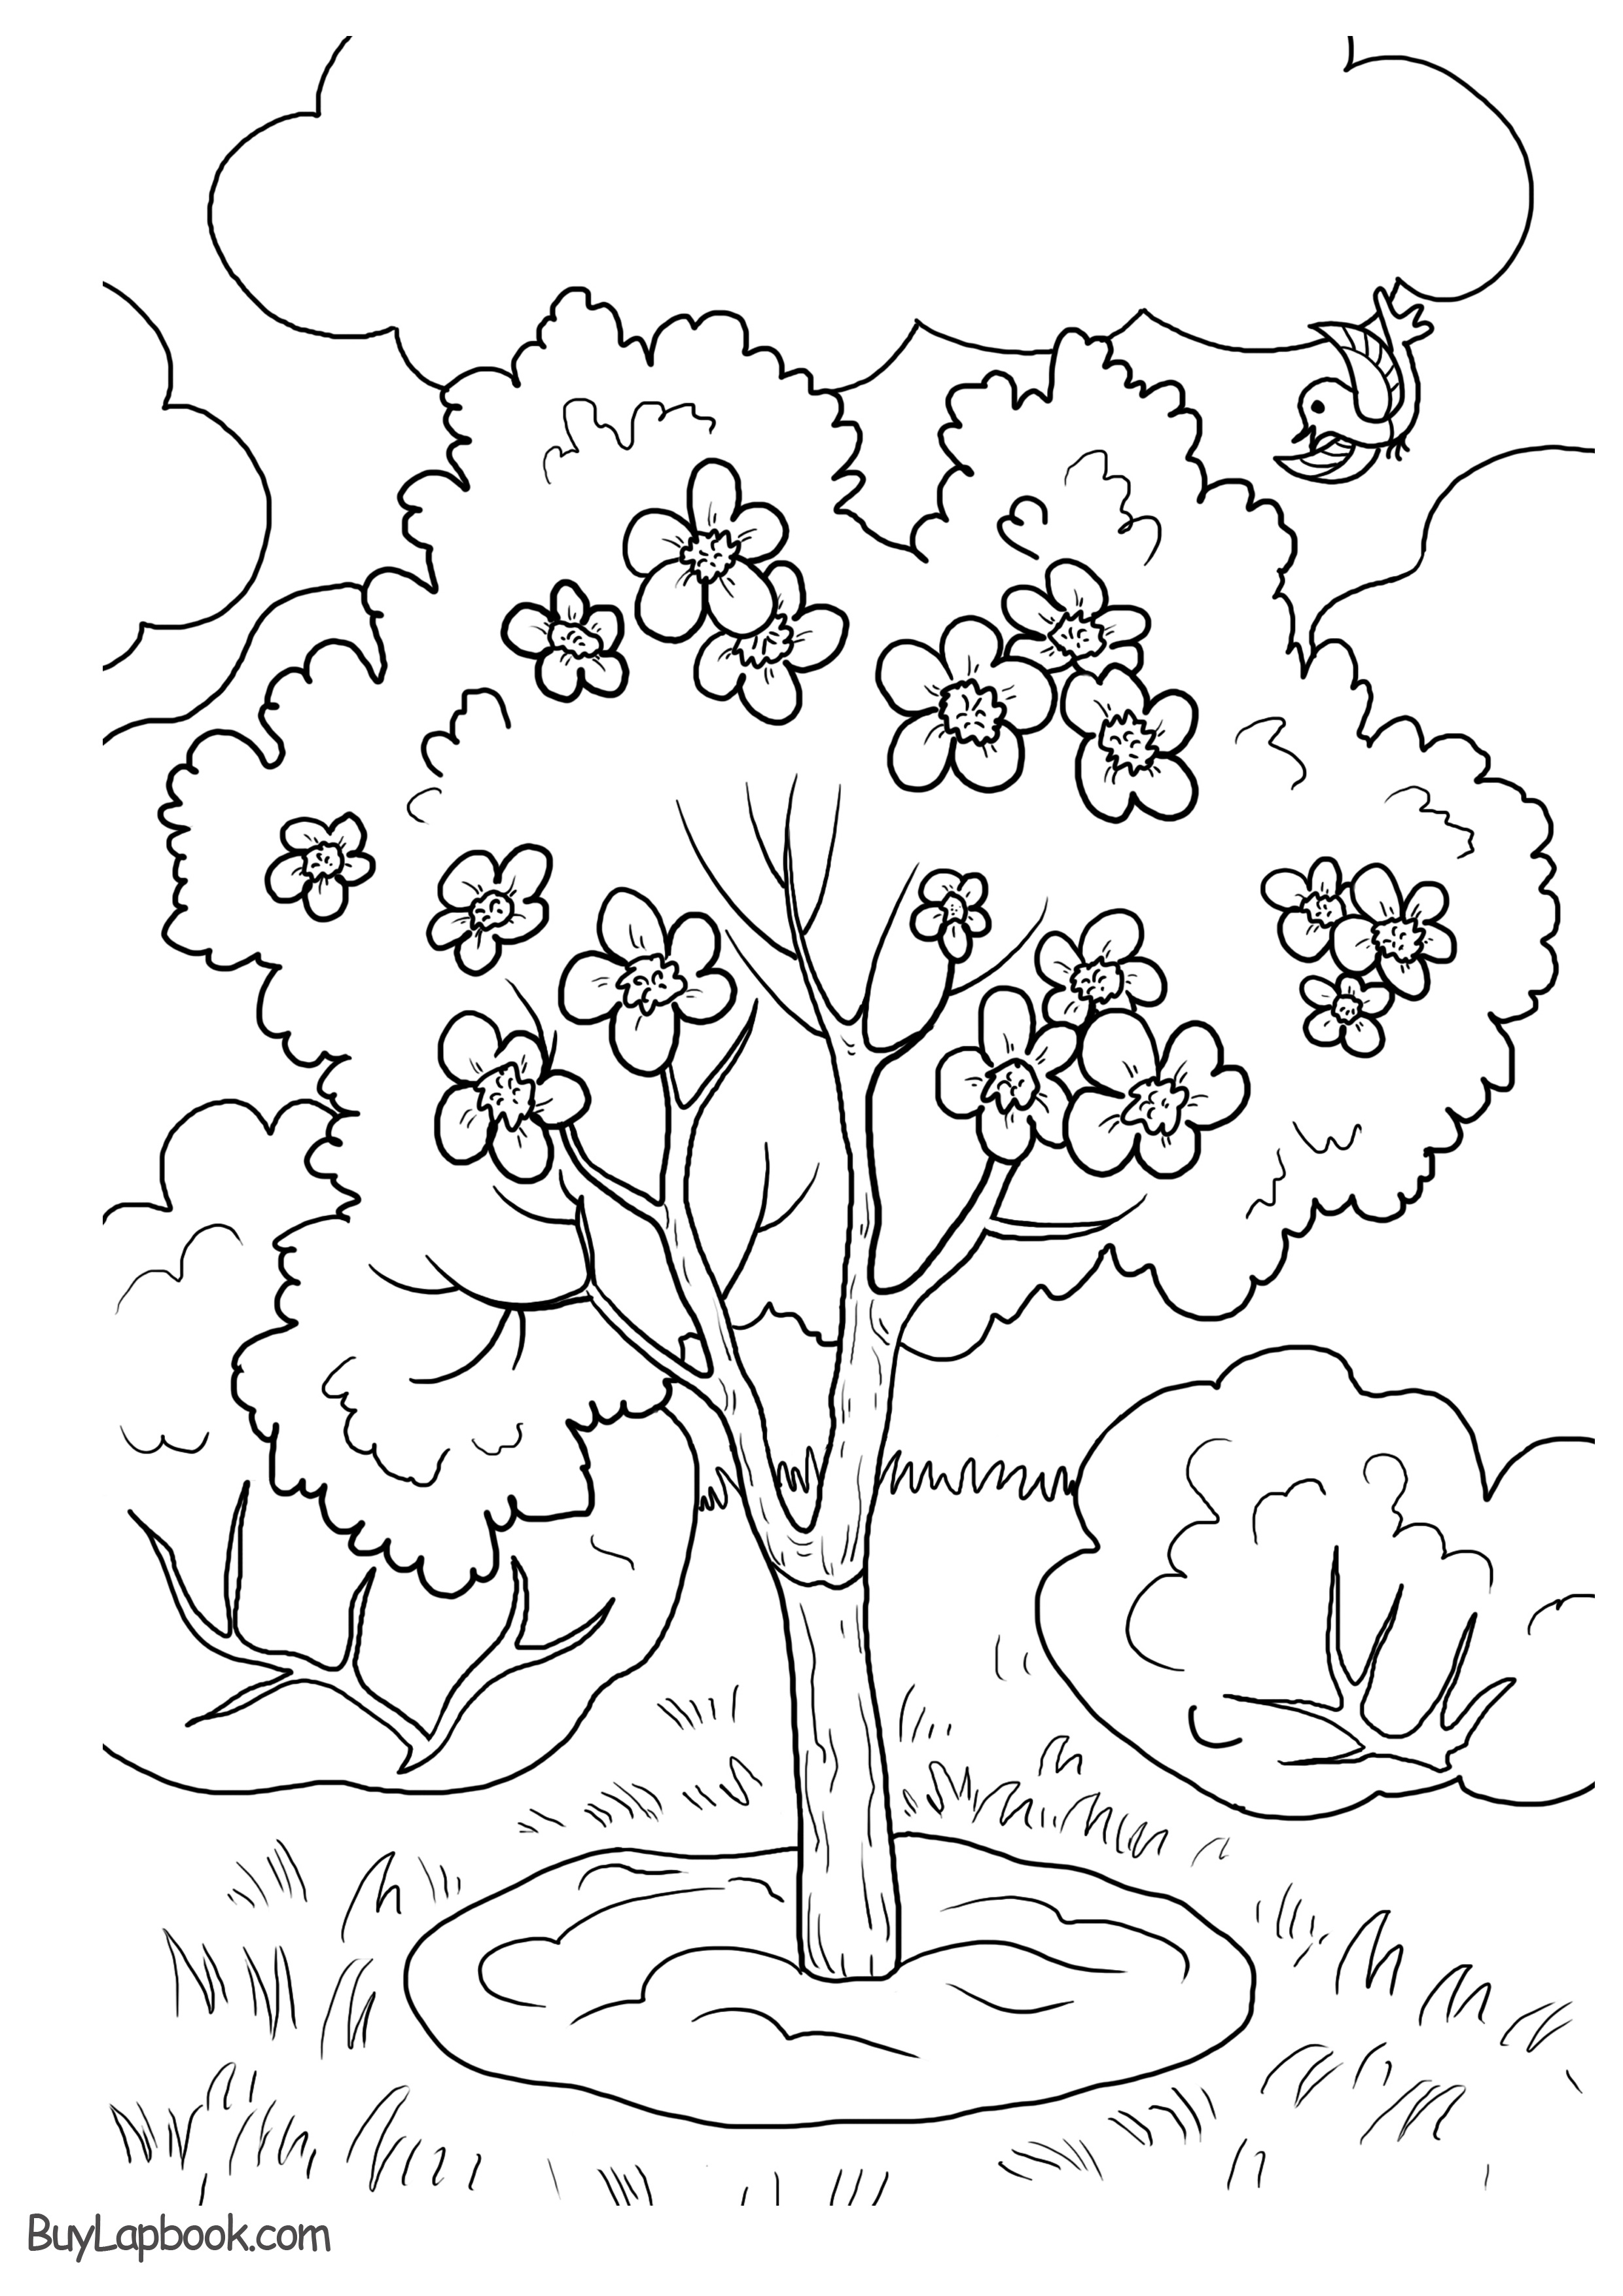 Apple Tree. Apple Life Cycle Coloring Pages | TeachersMag.com